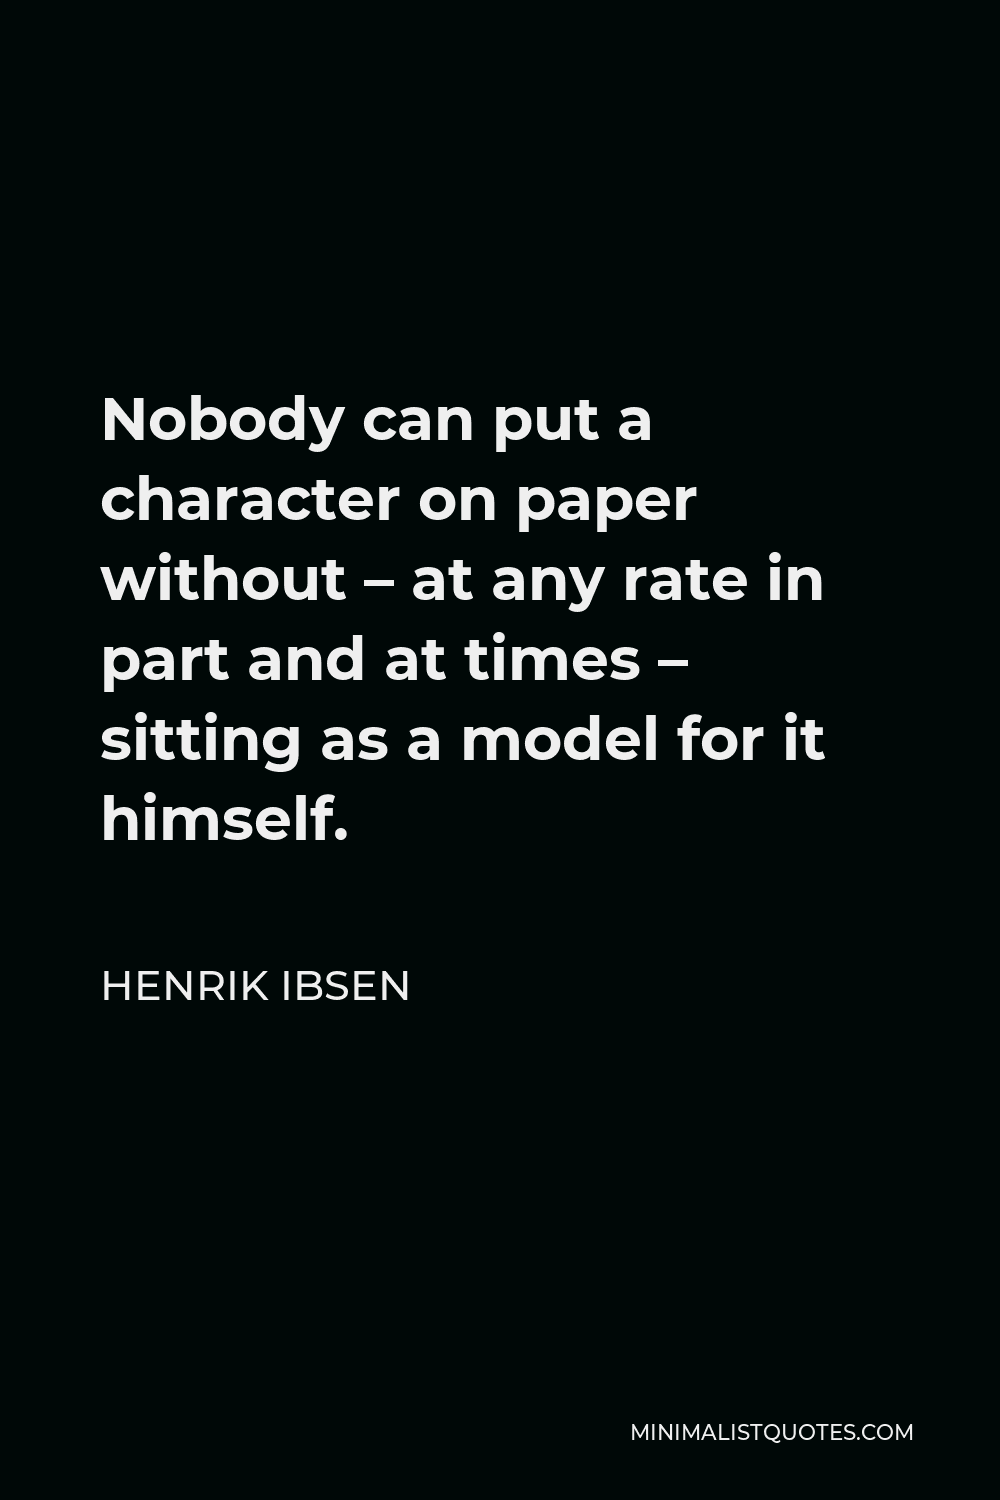 Henrik Ibsen Quote - Nobody can put a character on paper without – at any rate in part and at times – sitting as a model for it himself.